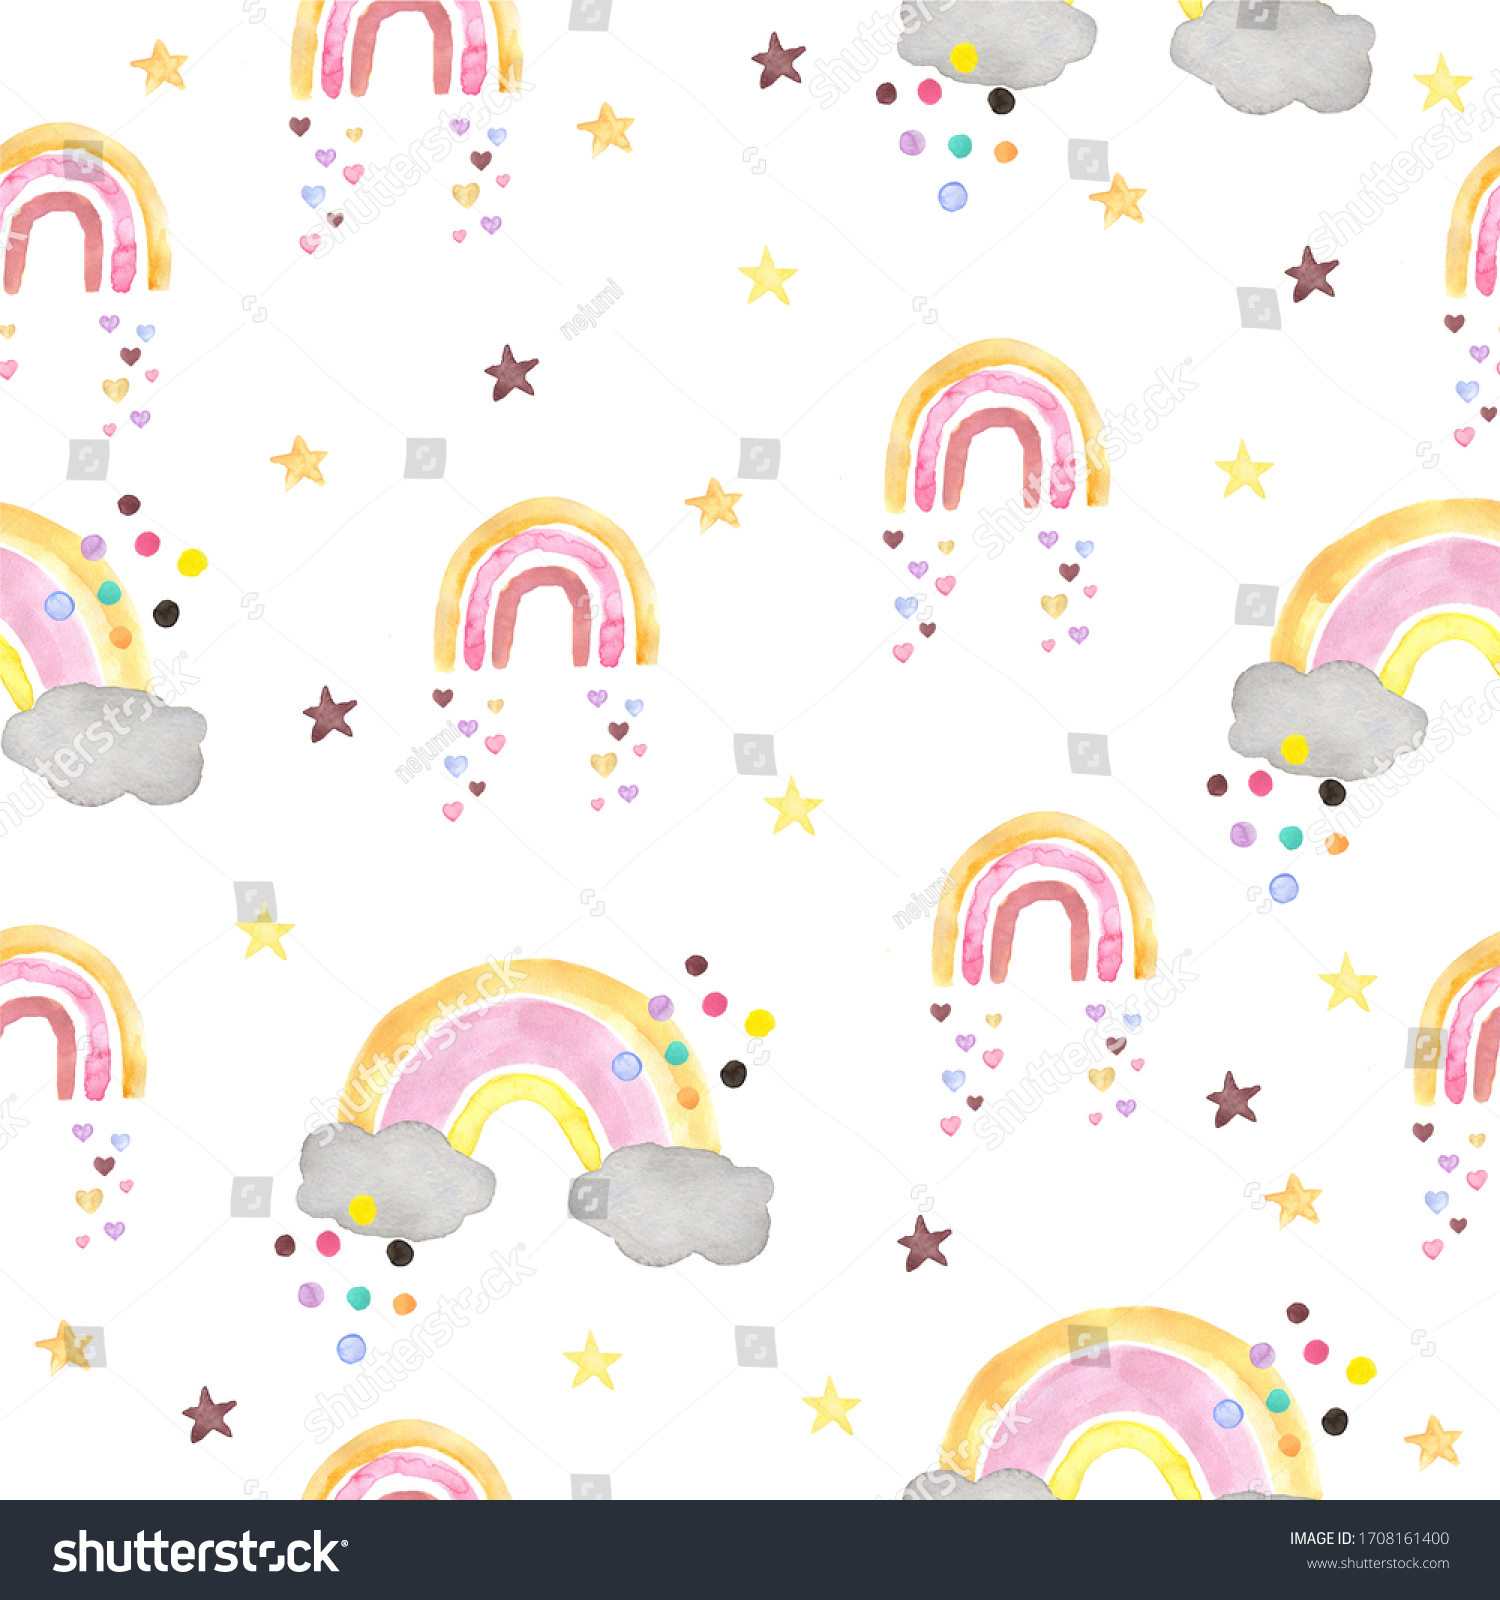 Seamless pattern with watercolor rainbow in pastel colors with colorful circles, stars, hearts. Modern illustration on a white background. Design for children's textiles, decor for a children's room. #1708161400